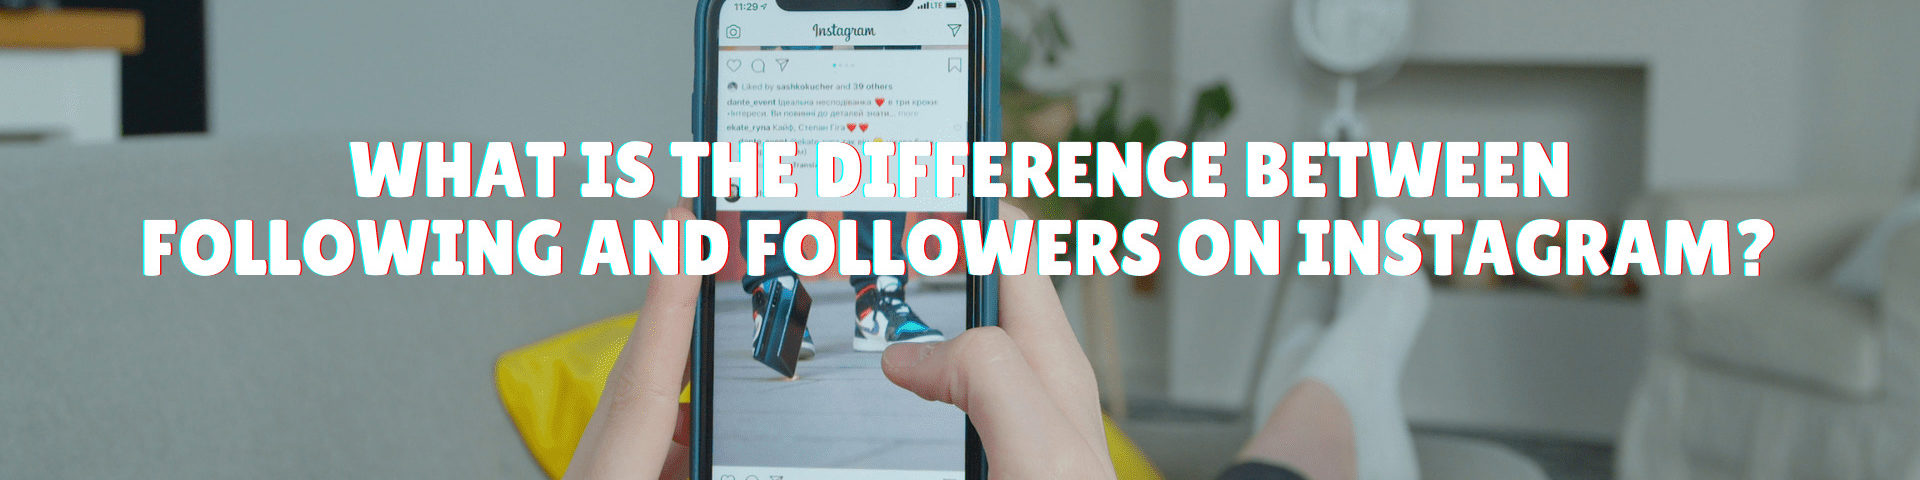 what is the difference between following and followers on instagram